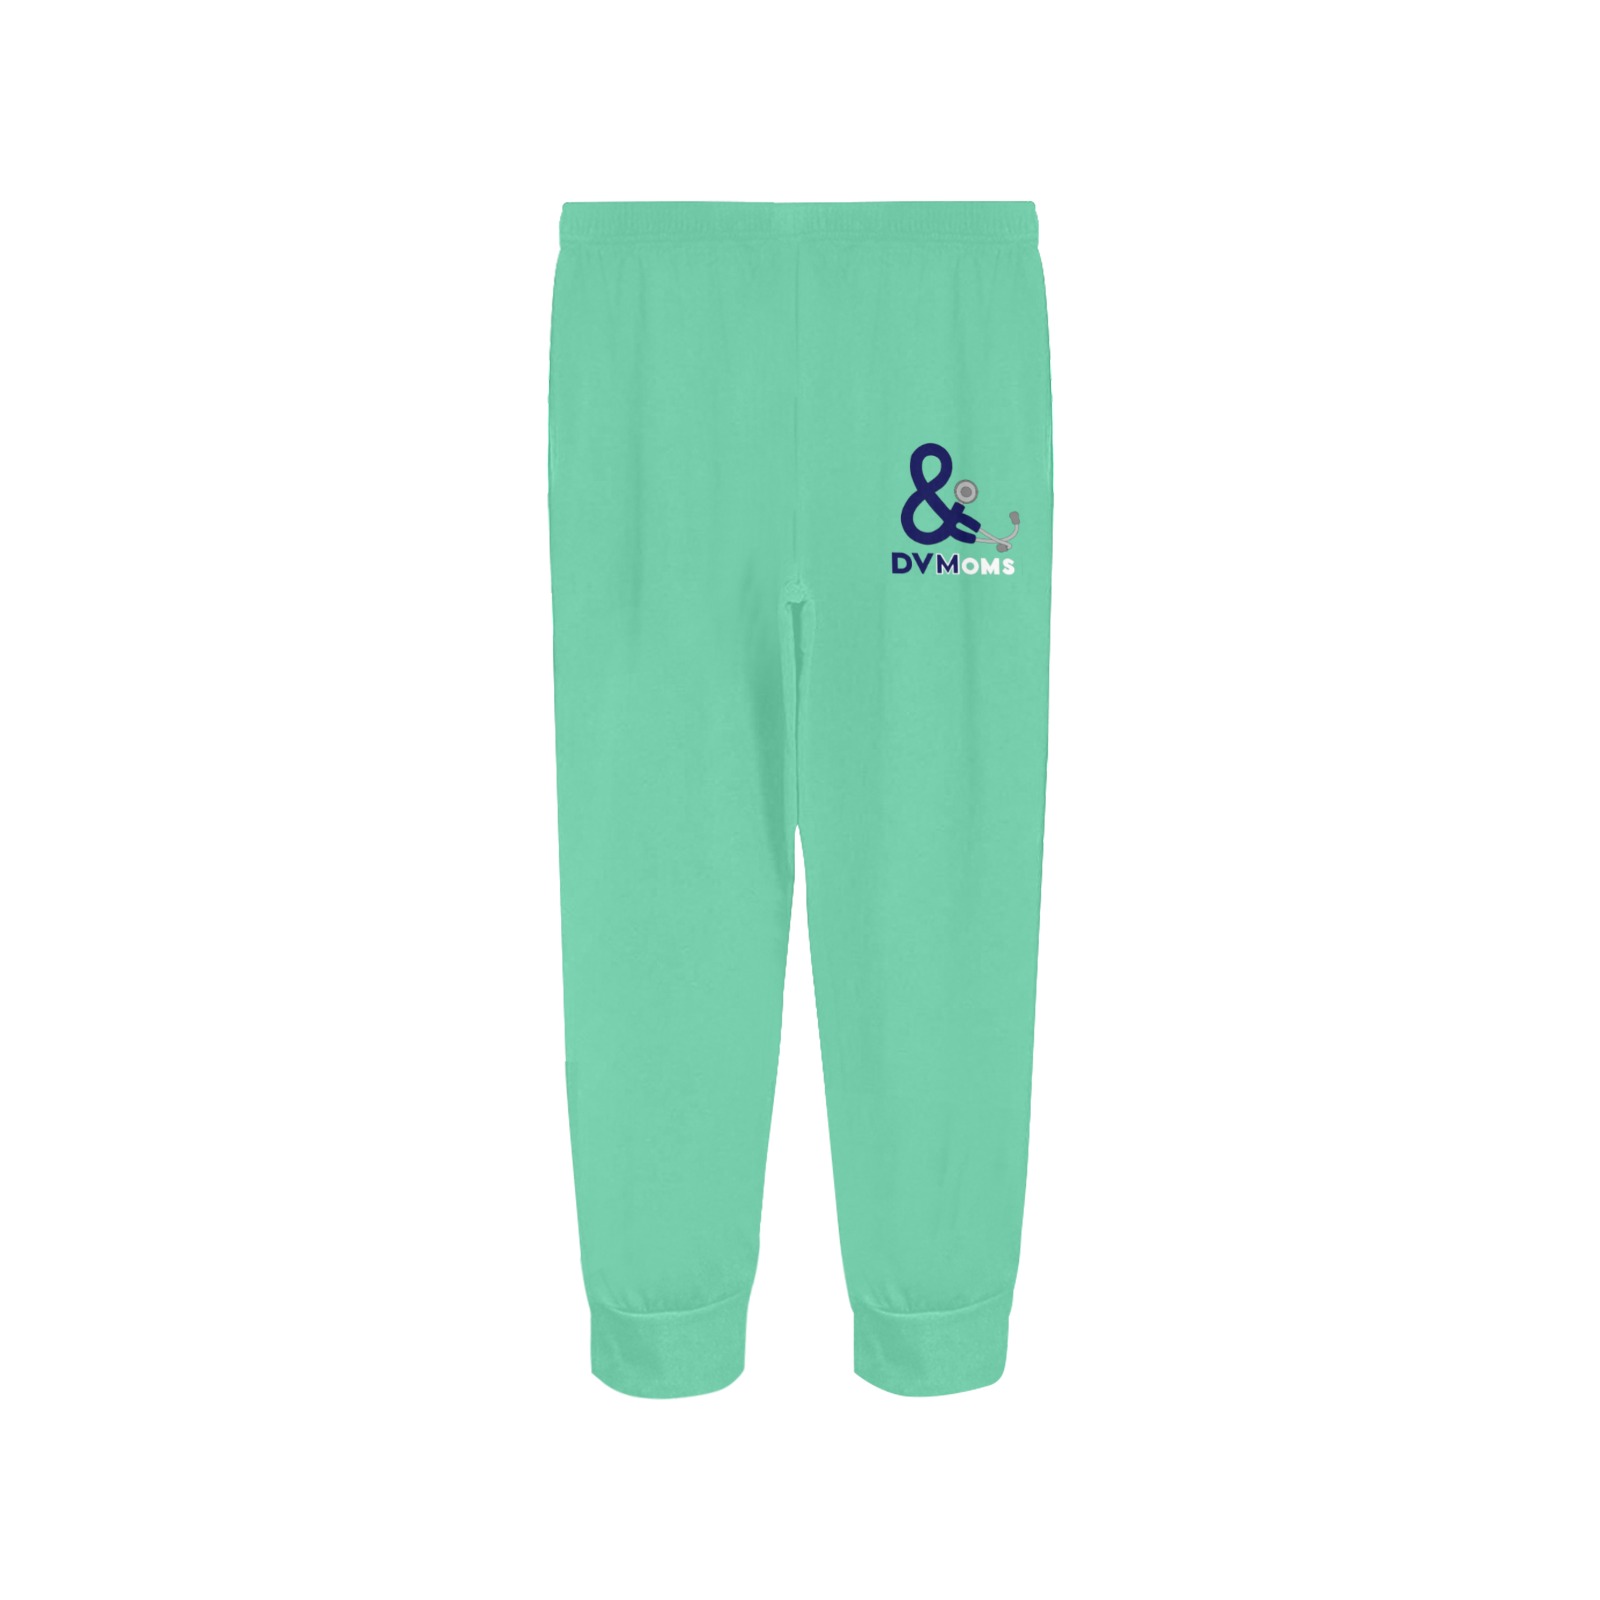 Pants mint with single logo Women's All Over Print Pajama Trousers